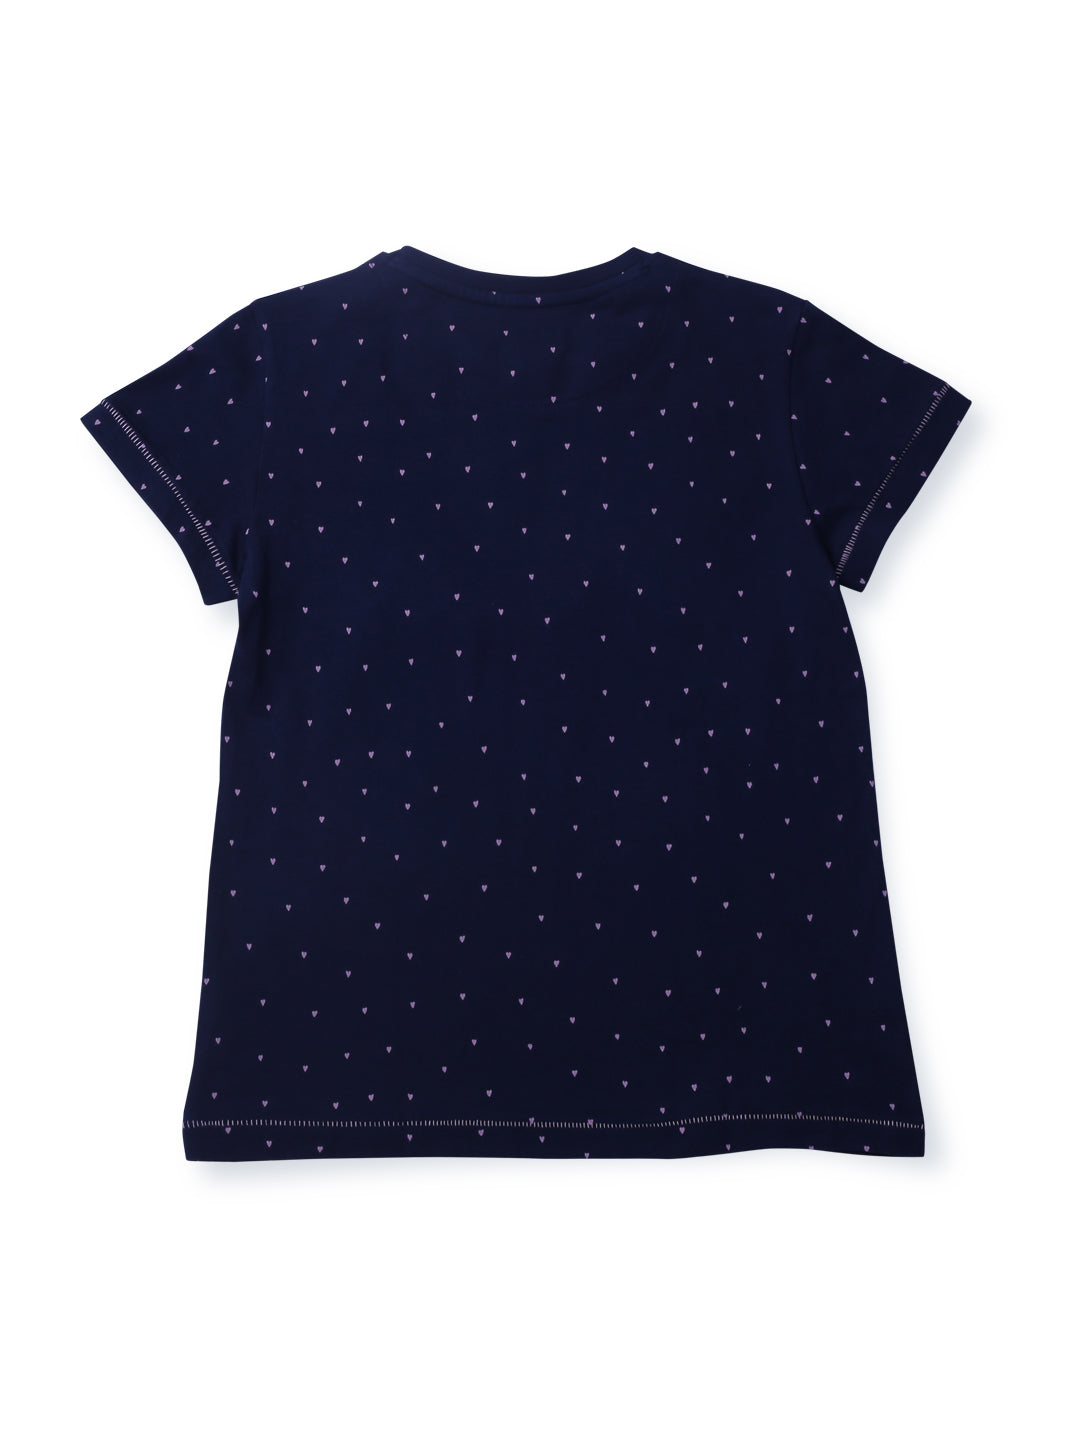 Girls Navy Blue Applique Knits Knits Top